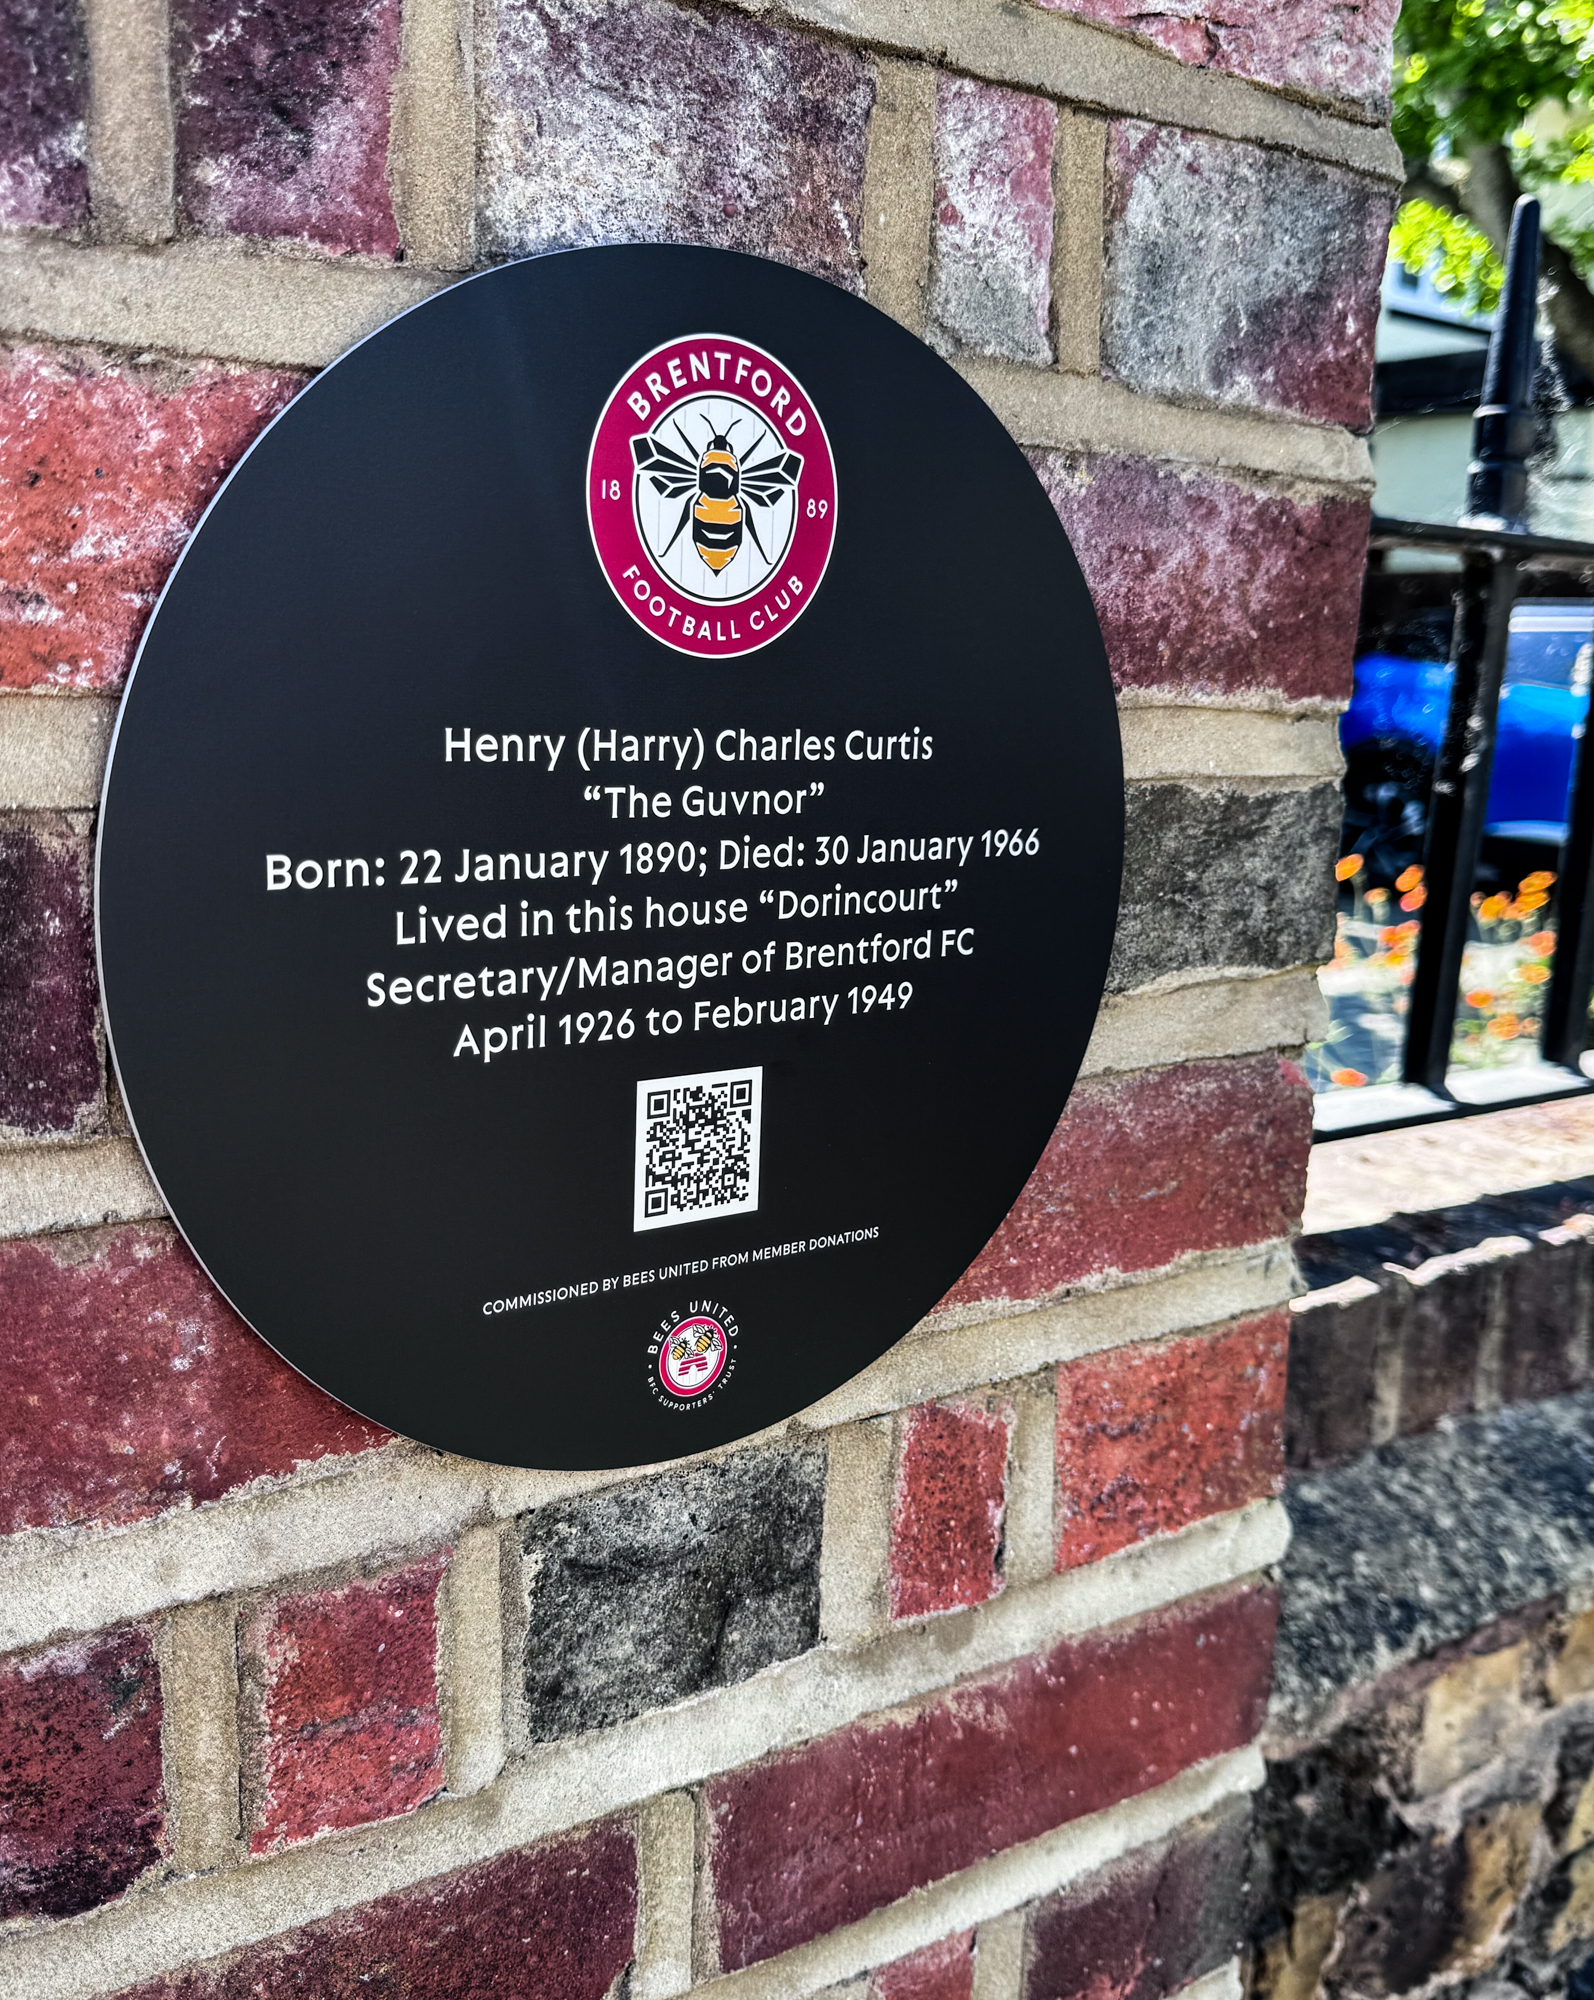 Bees United plaque celebrates where Harry Curtis and his family lived in Brentford in the 1930's